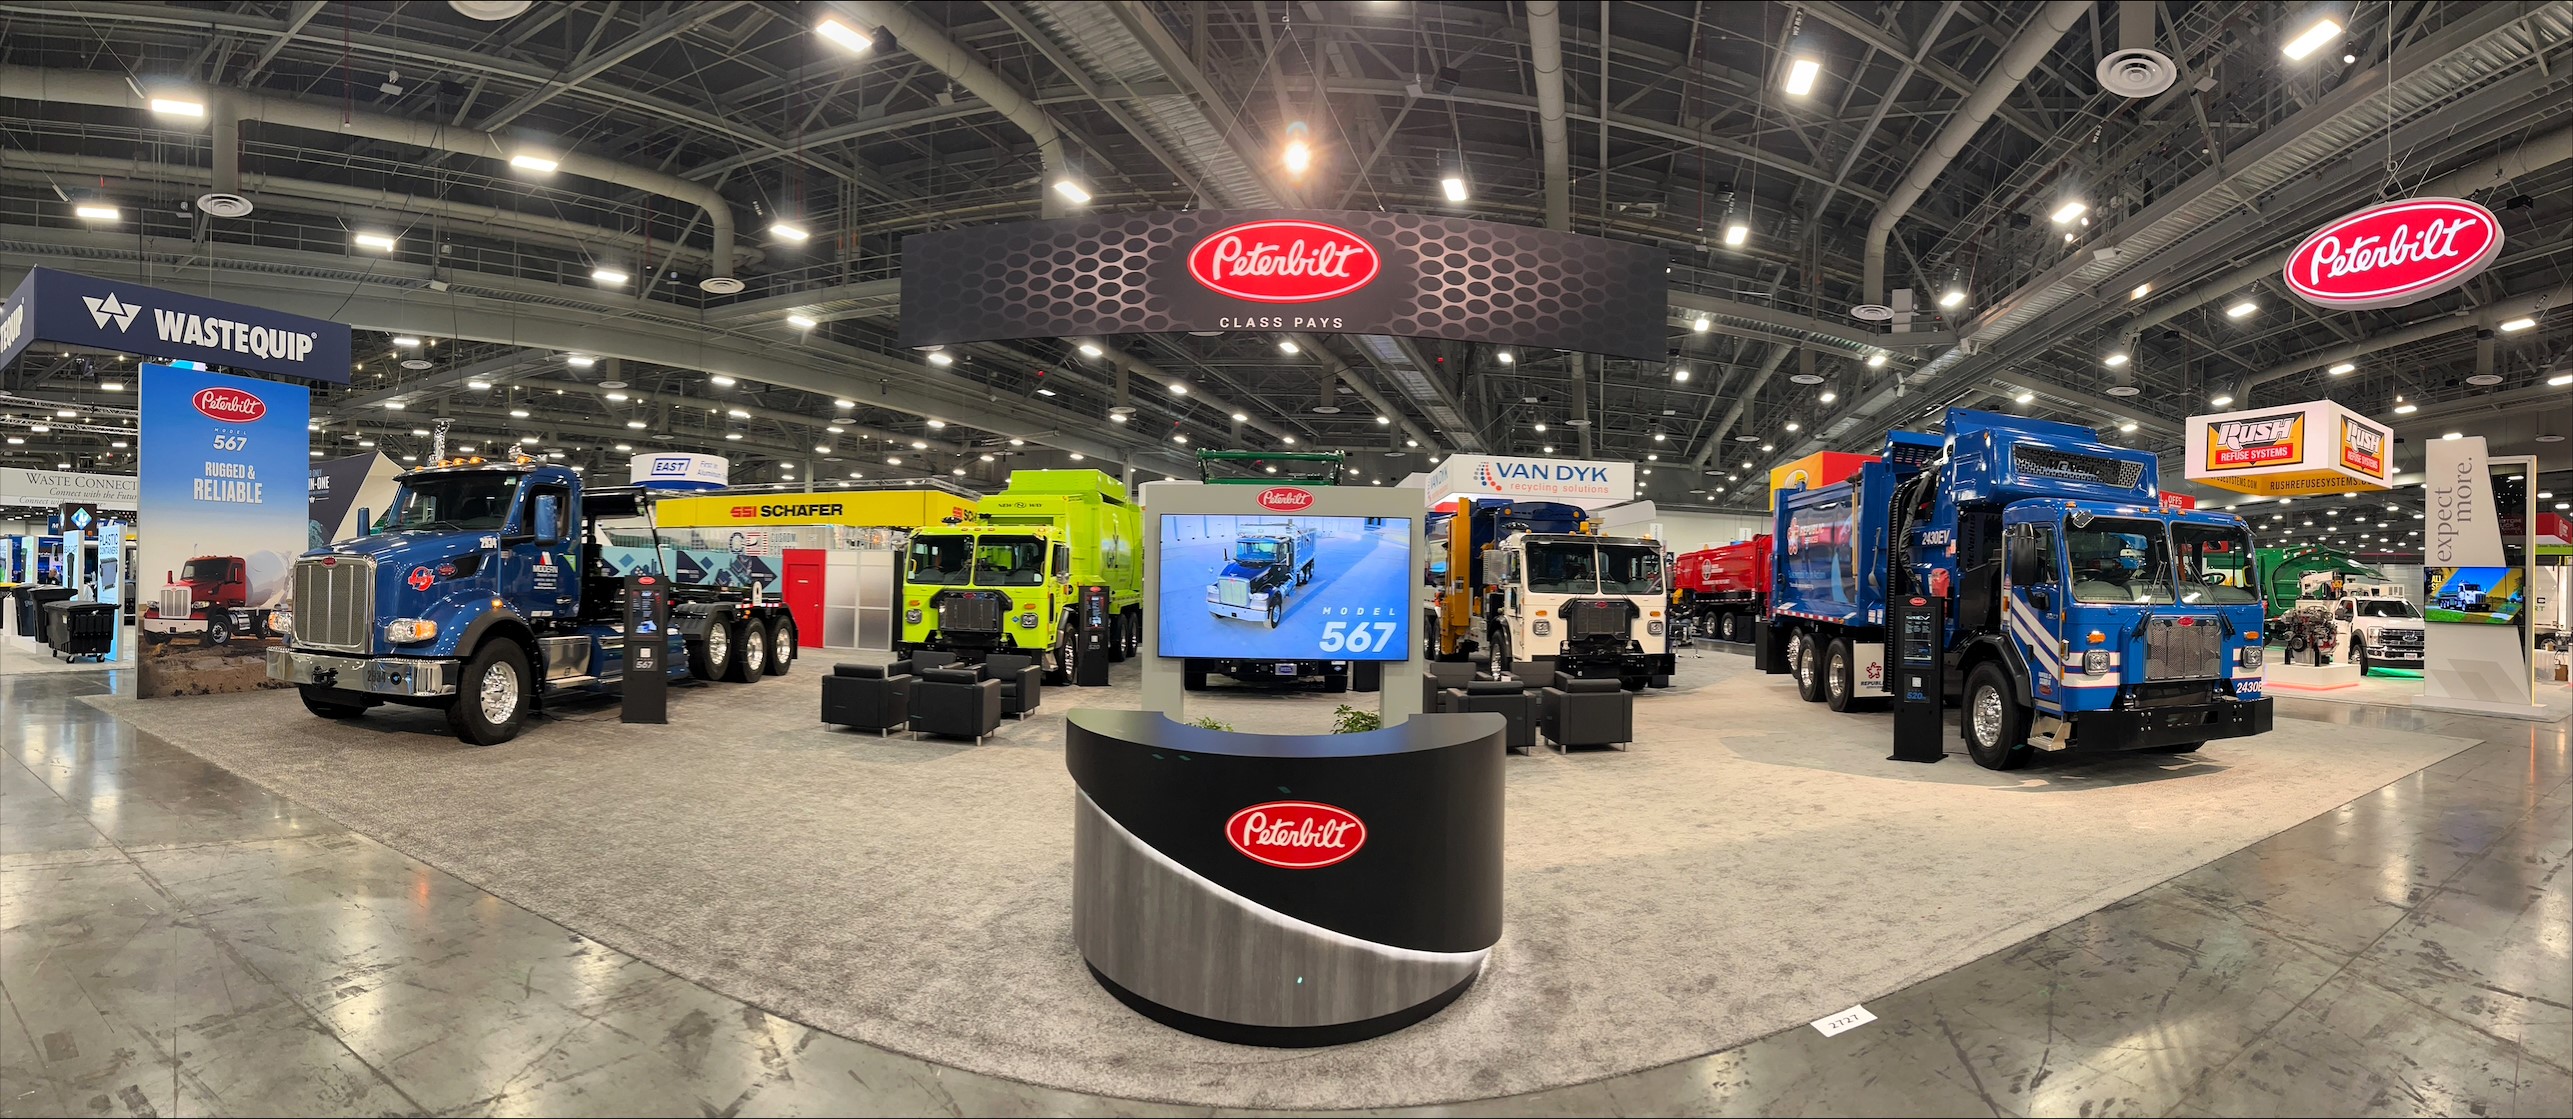 Peterbilt Exhibits Extensive Refuse Lineup at Waste Expo - Hero image